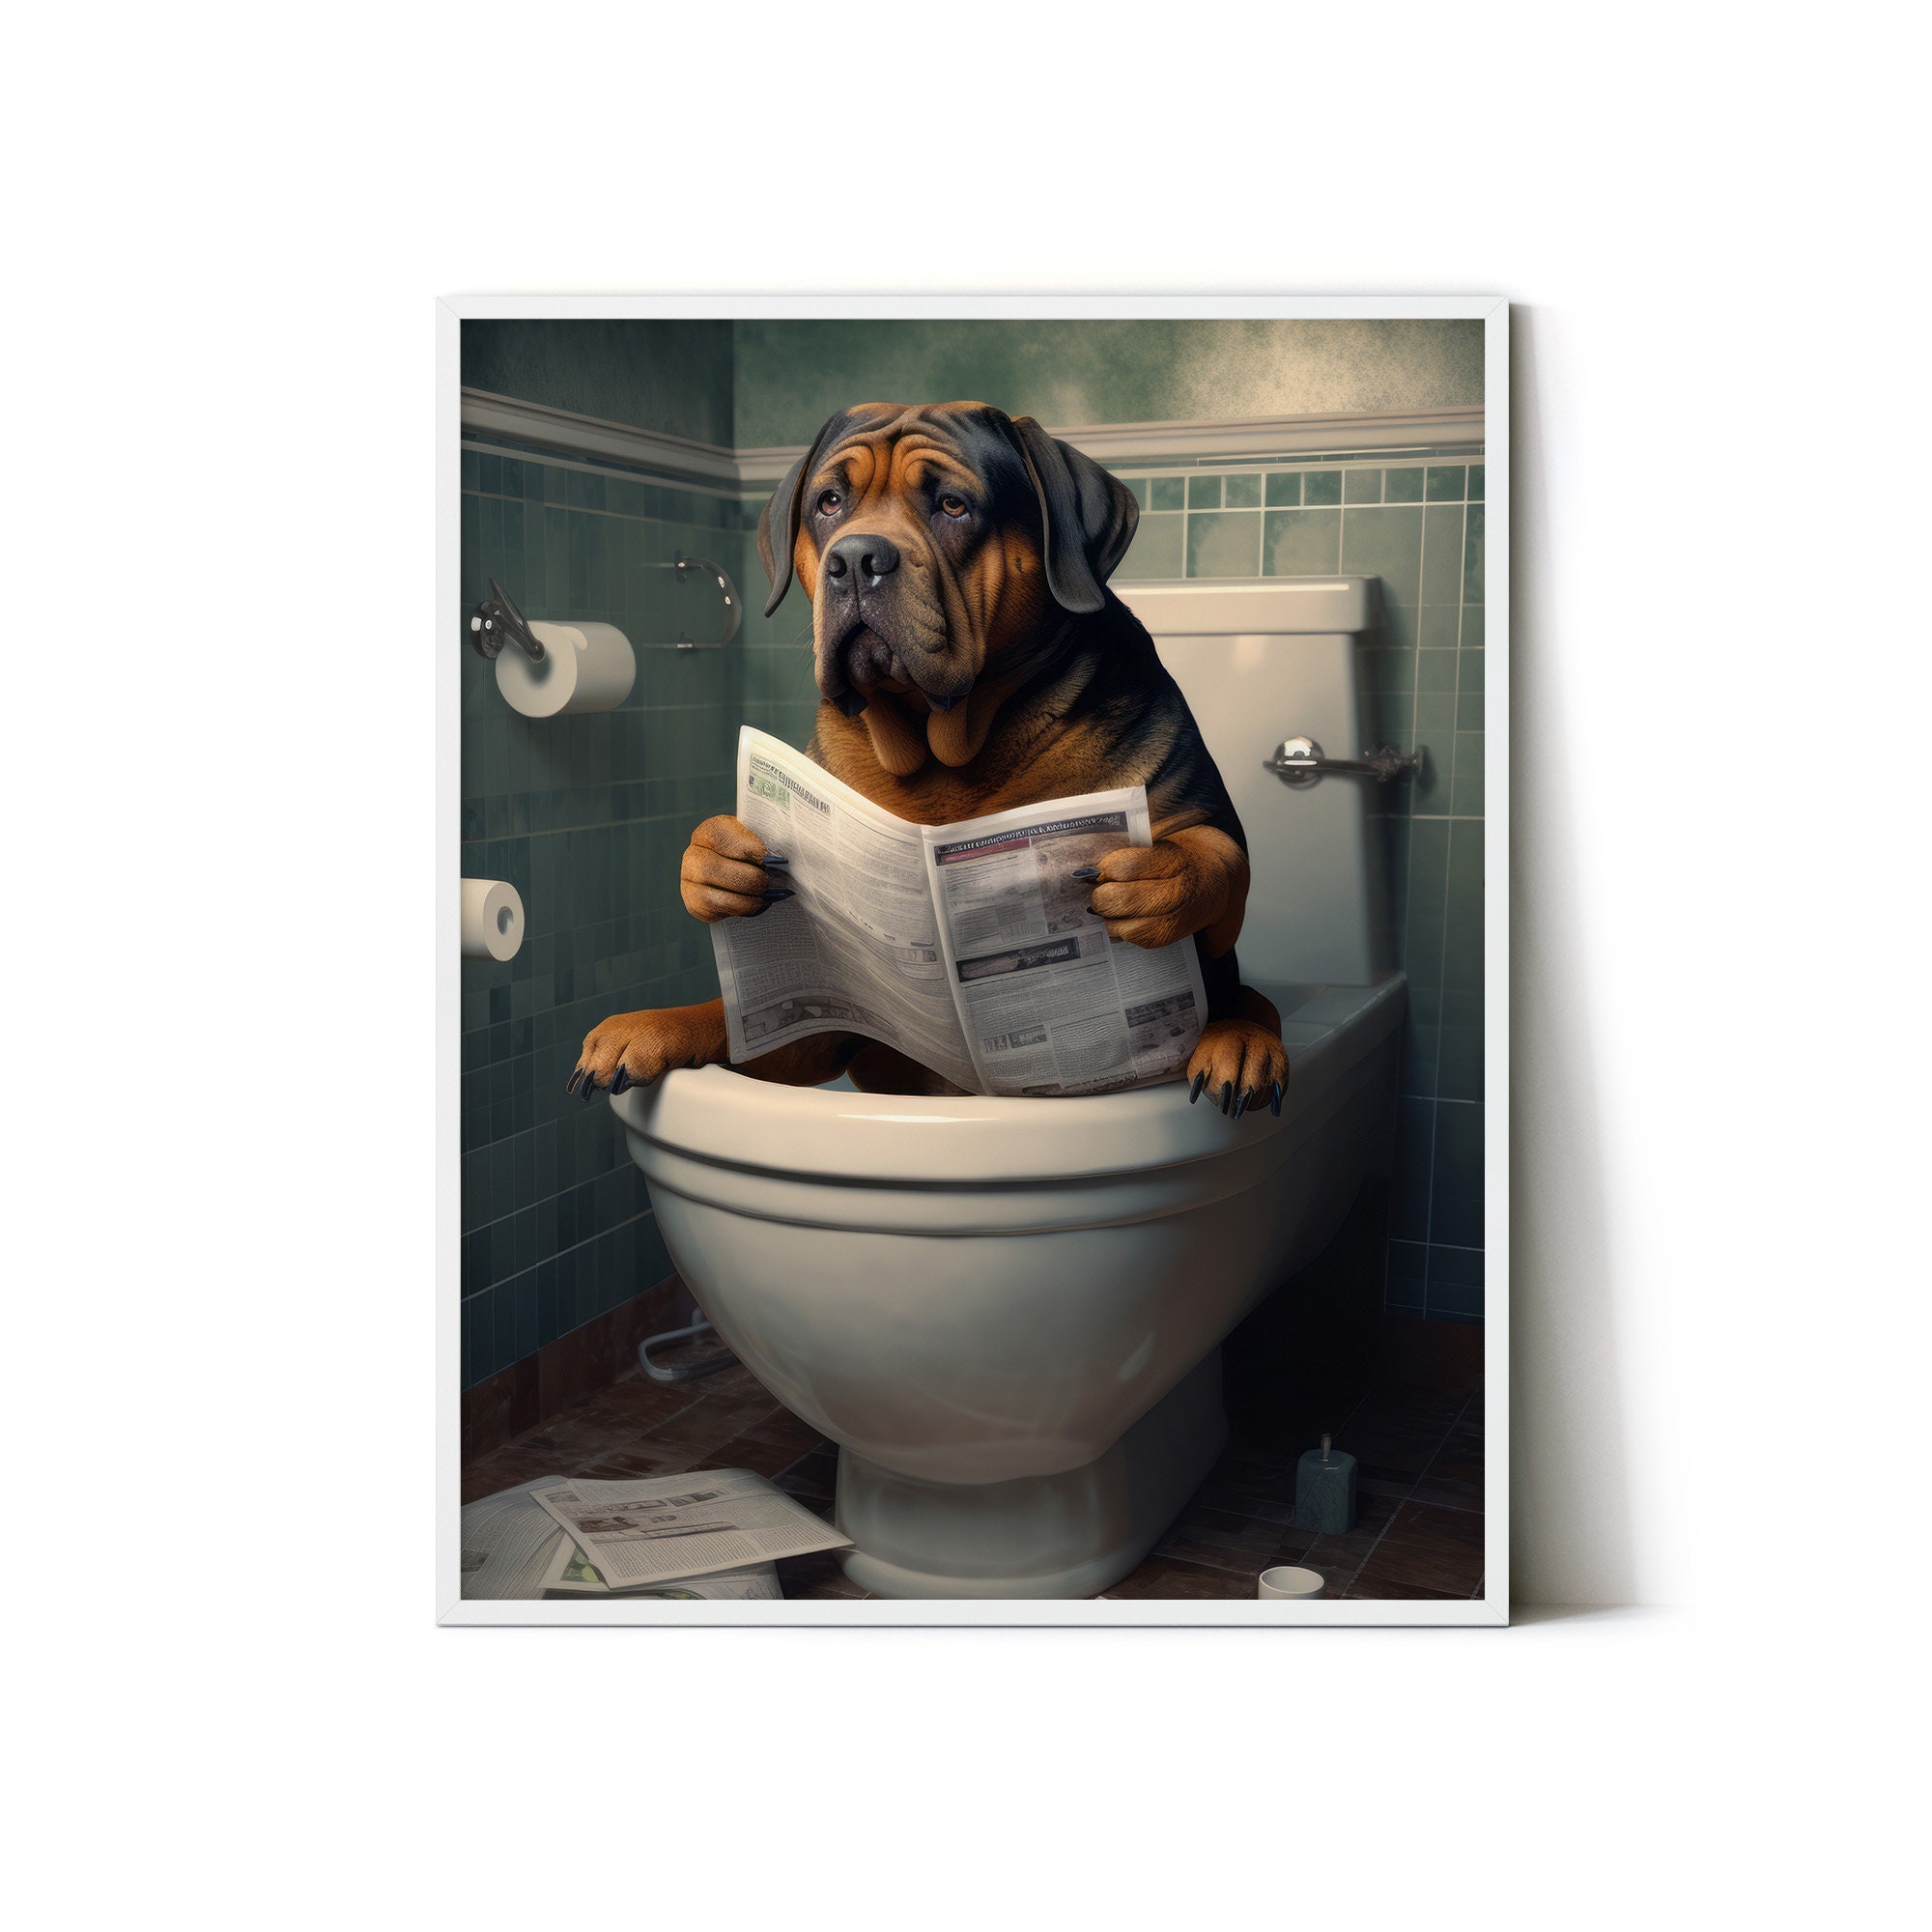 Rottweiler Dog Sitting on the Toilet Reading a Newspaper, Funny